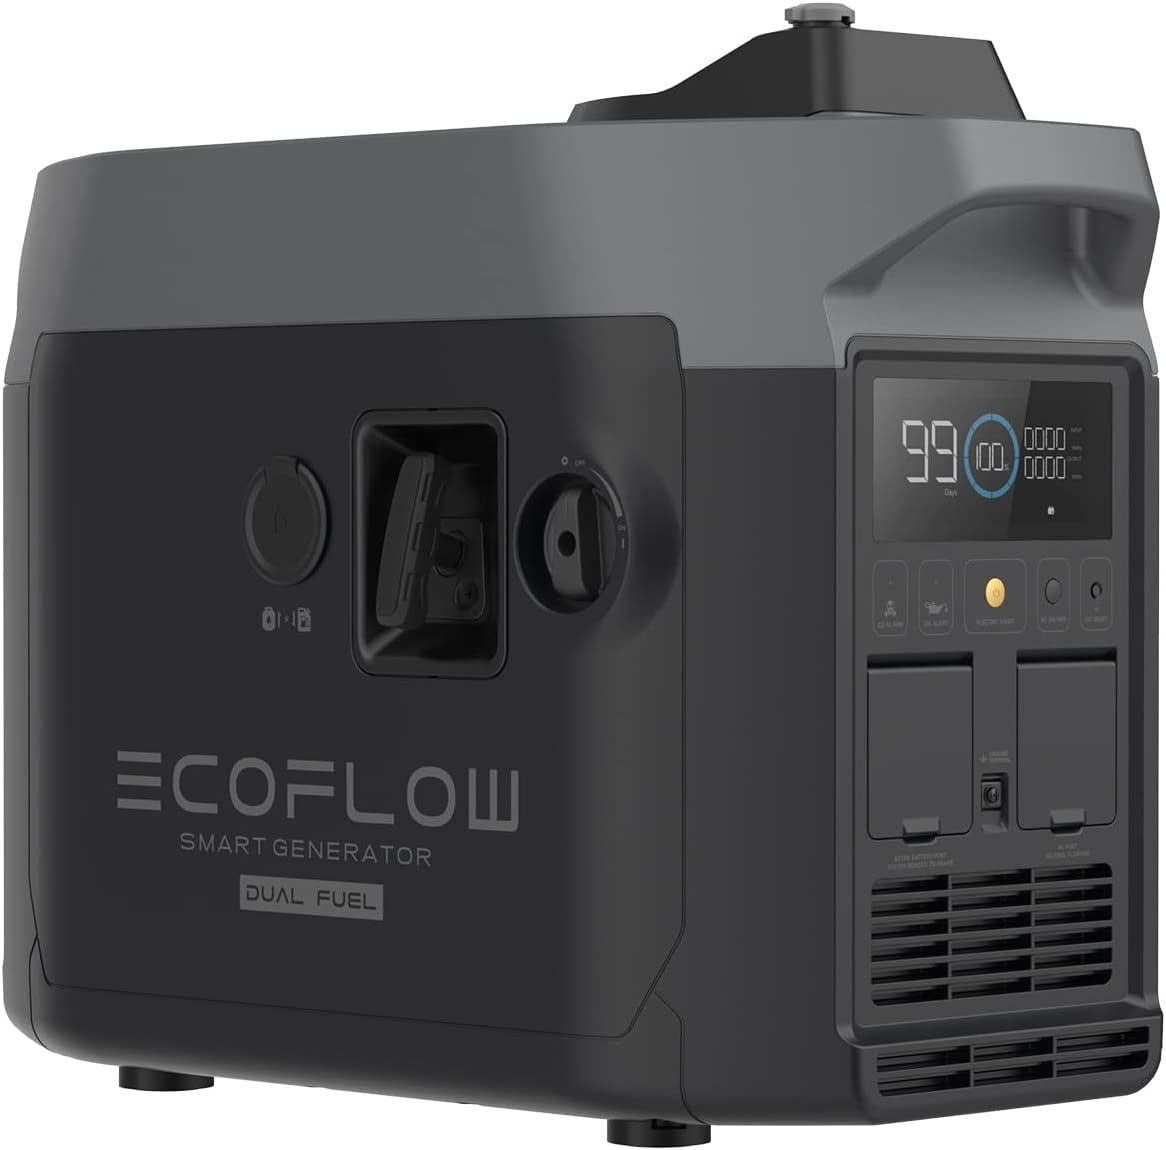 EcoFlow Smart Dual Fuel Generator,Gas/LPG Inverter Generator,Integrates with Delta Pro/Delta Max/DELTA 2,1800W AC Output,for Outdoor Camping,Home Backup,Emergency,RV,off-Grid